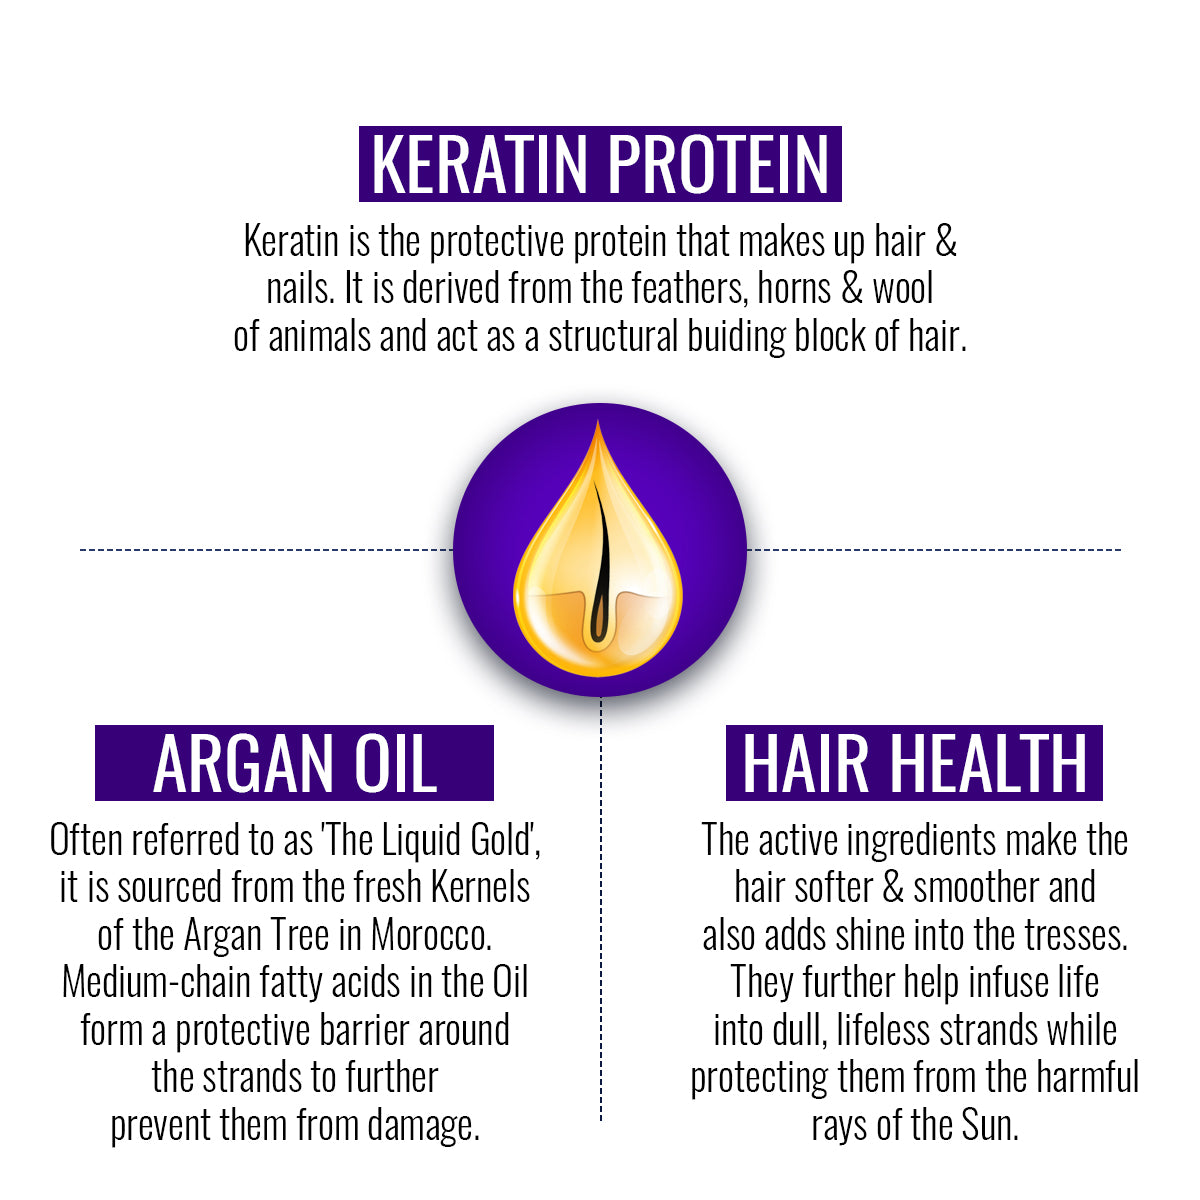 St.Botanica Pro Keratin & Argan Oil Smooth Therapy Hair Serum - For Soft, Smooth & Shiny Hair, 120ml